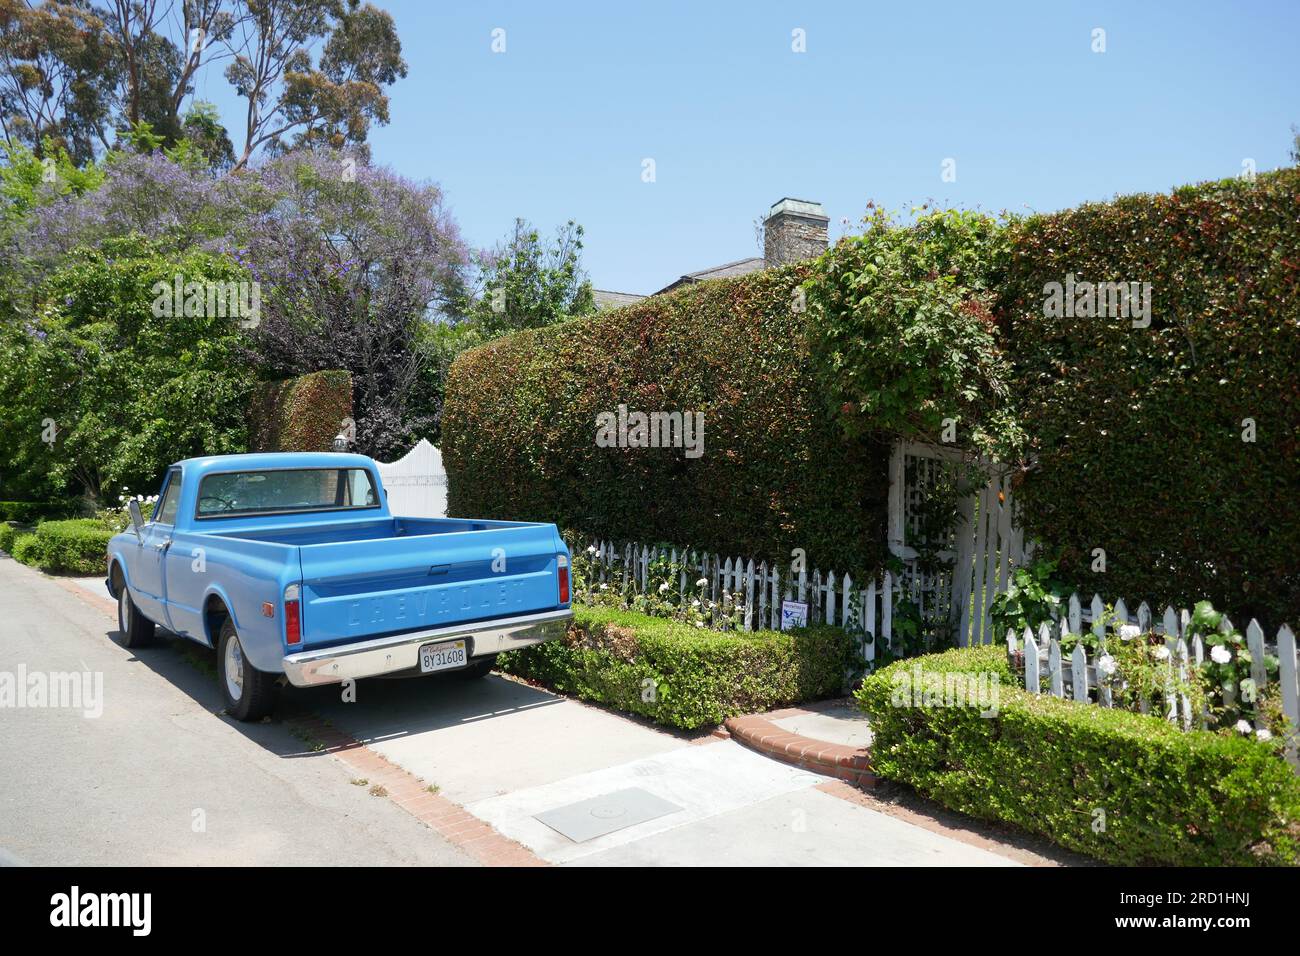 Pacific Palisades, California, USA 16th July 2023 Actor Kurt Russell and Actress Goldie Hawn Home/house on July 16, 2023 in Pacific Palisades, California, USA. Photo by Barry King/Alamy Stock Photo Stock Photo